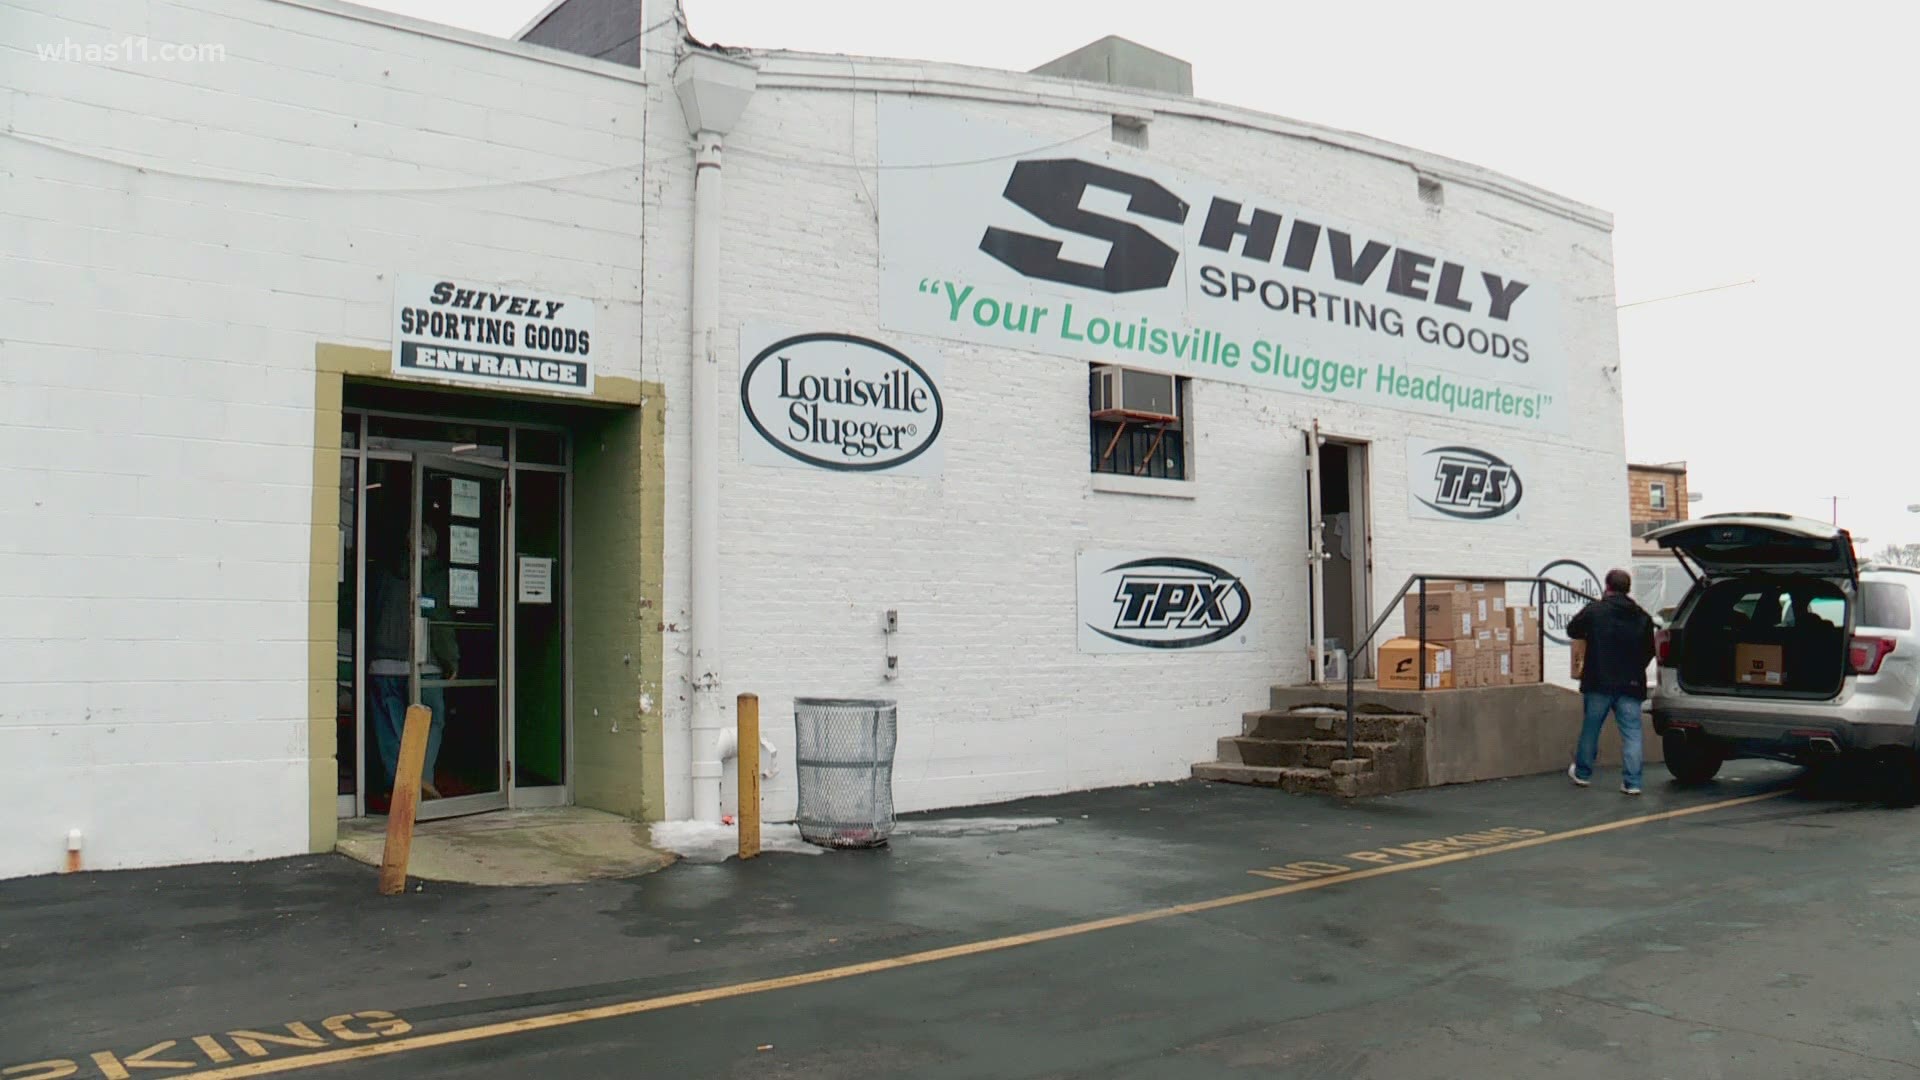 Shively Sporting Goods is merging with BSN Sports, the largest sports apparel and equipment business in the country.